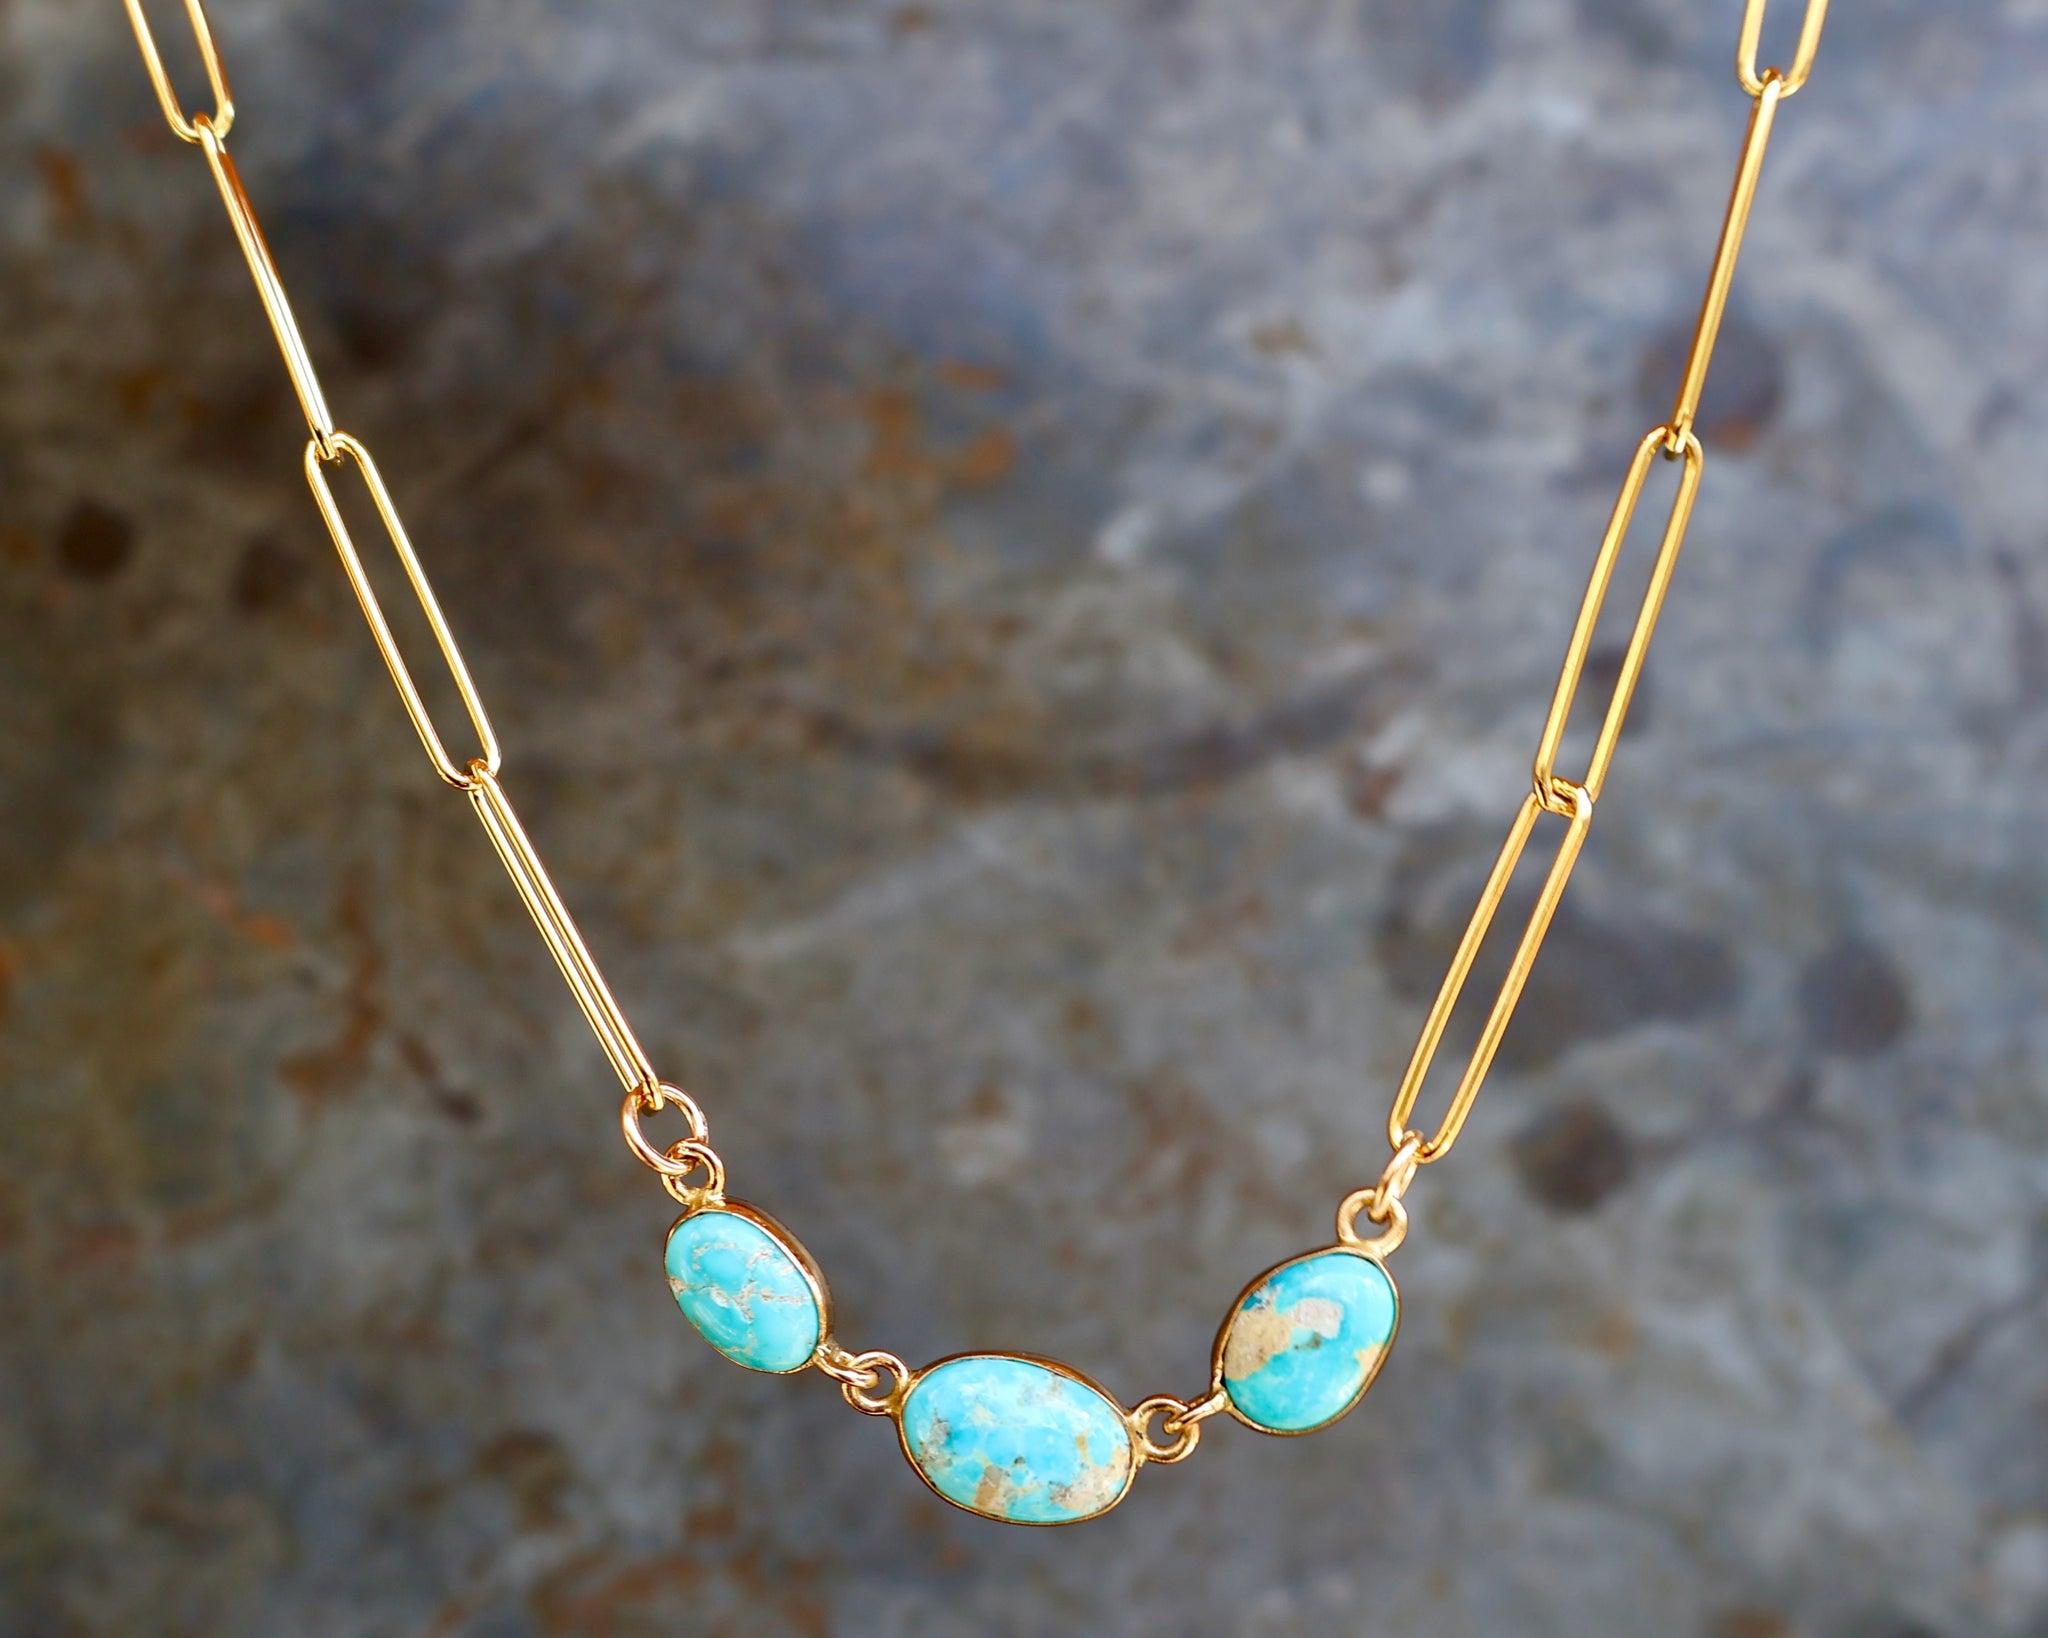 Triple Turquoise Necklace with Gold Fill Paperclip Chain B8